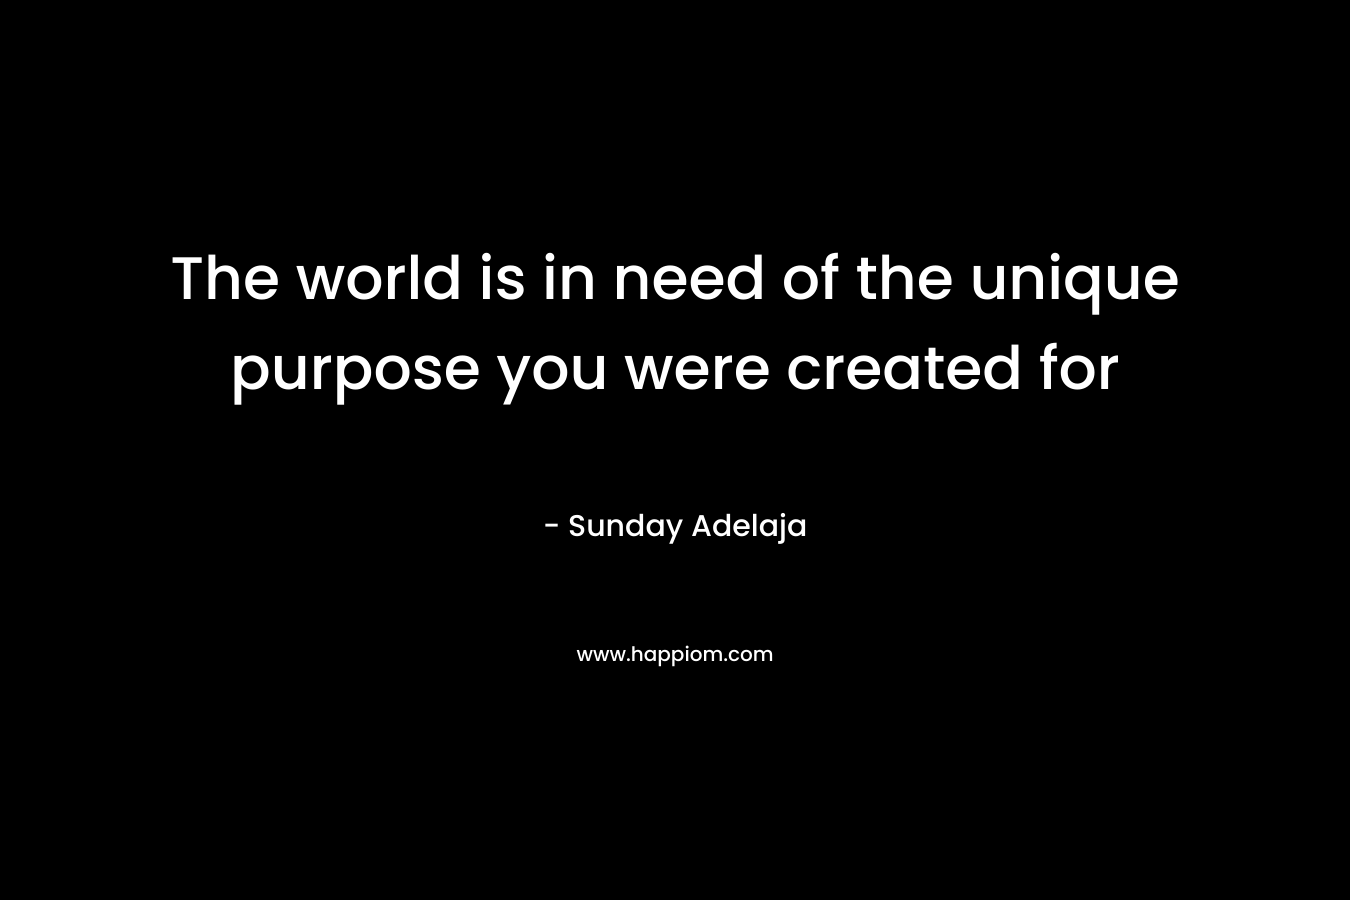 The world is in need of the unique purpose you were created for